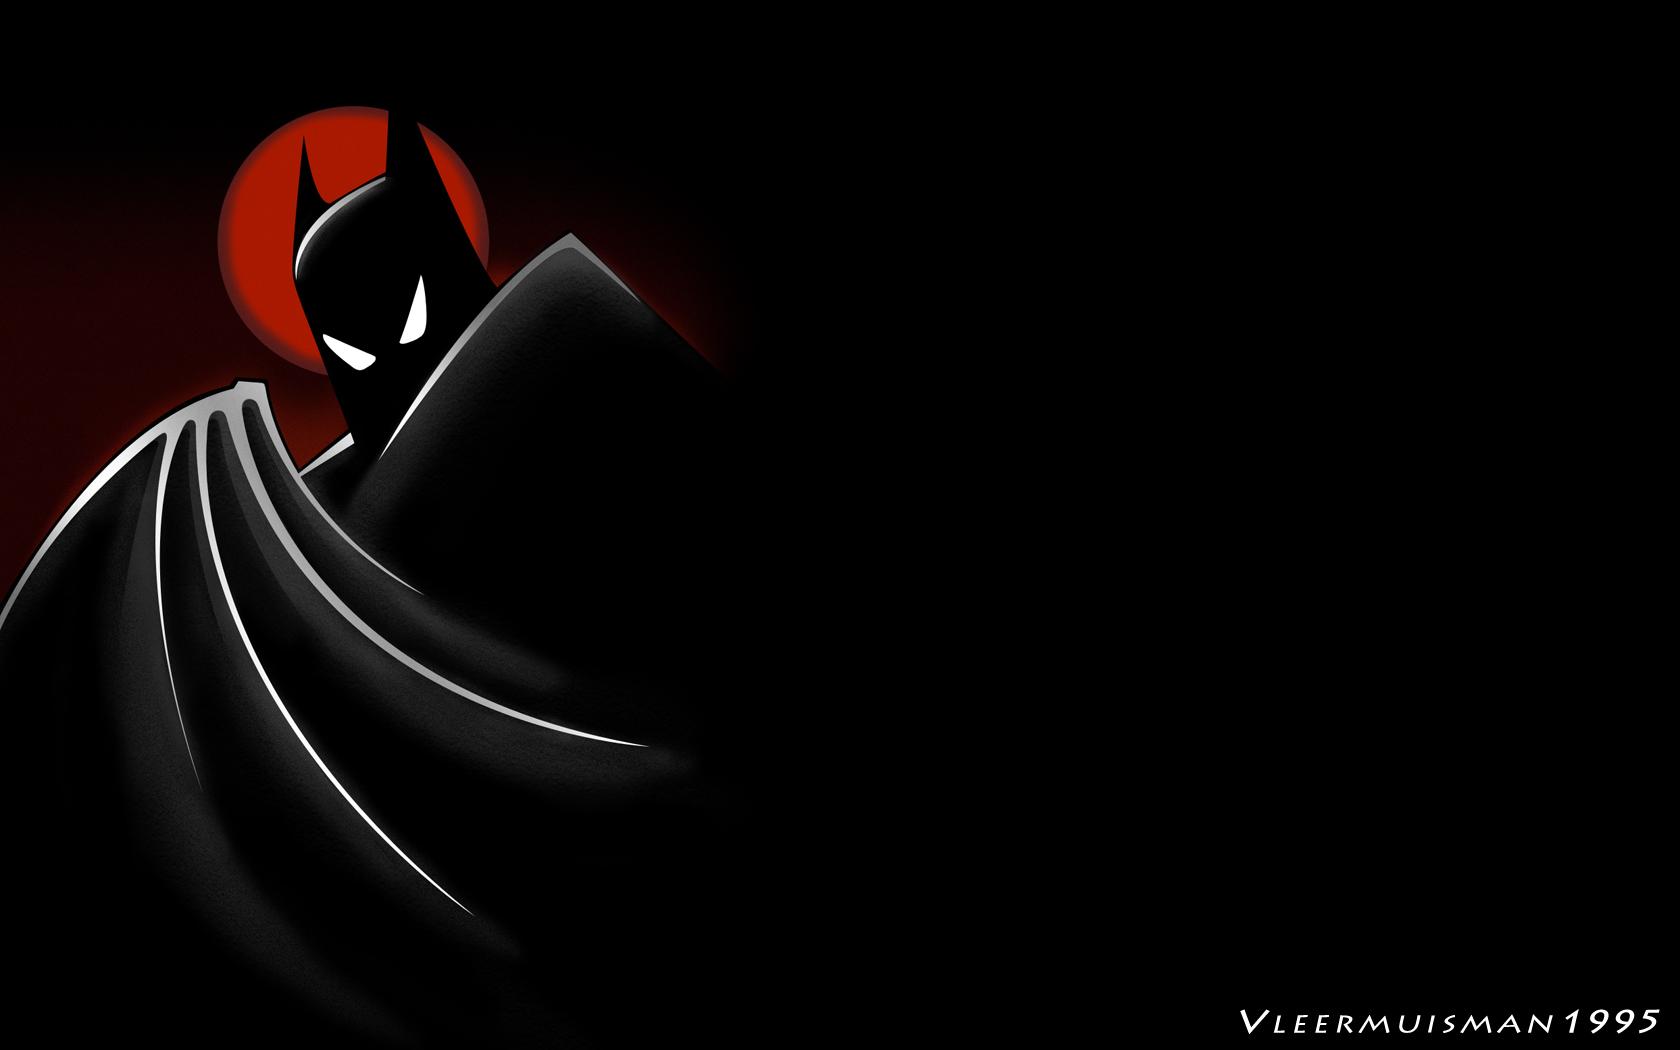 TV Show Batman: The Animated Series 8k Ultra HD Wallpaper by yngams